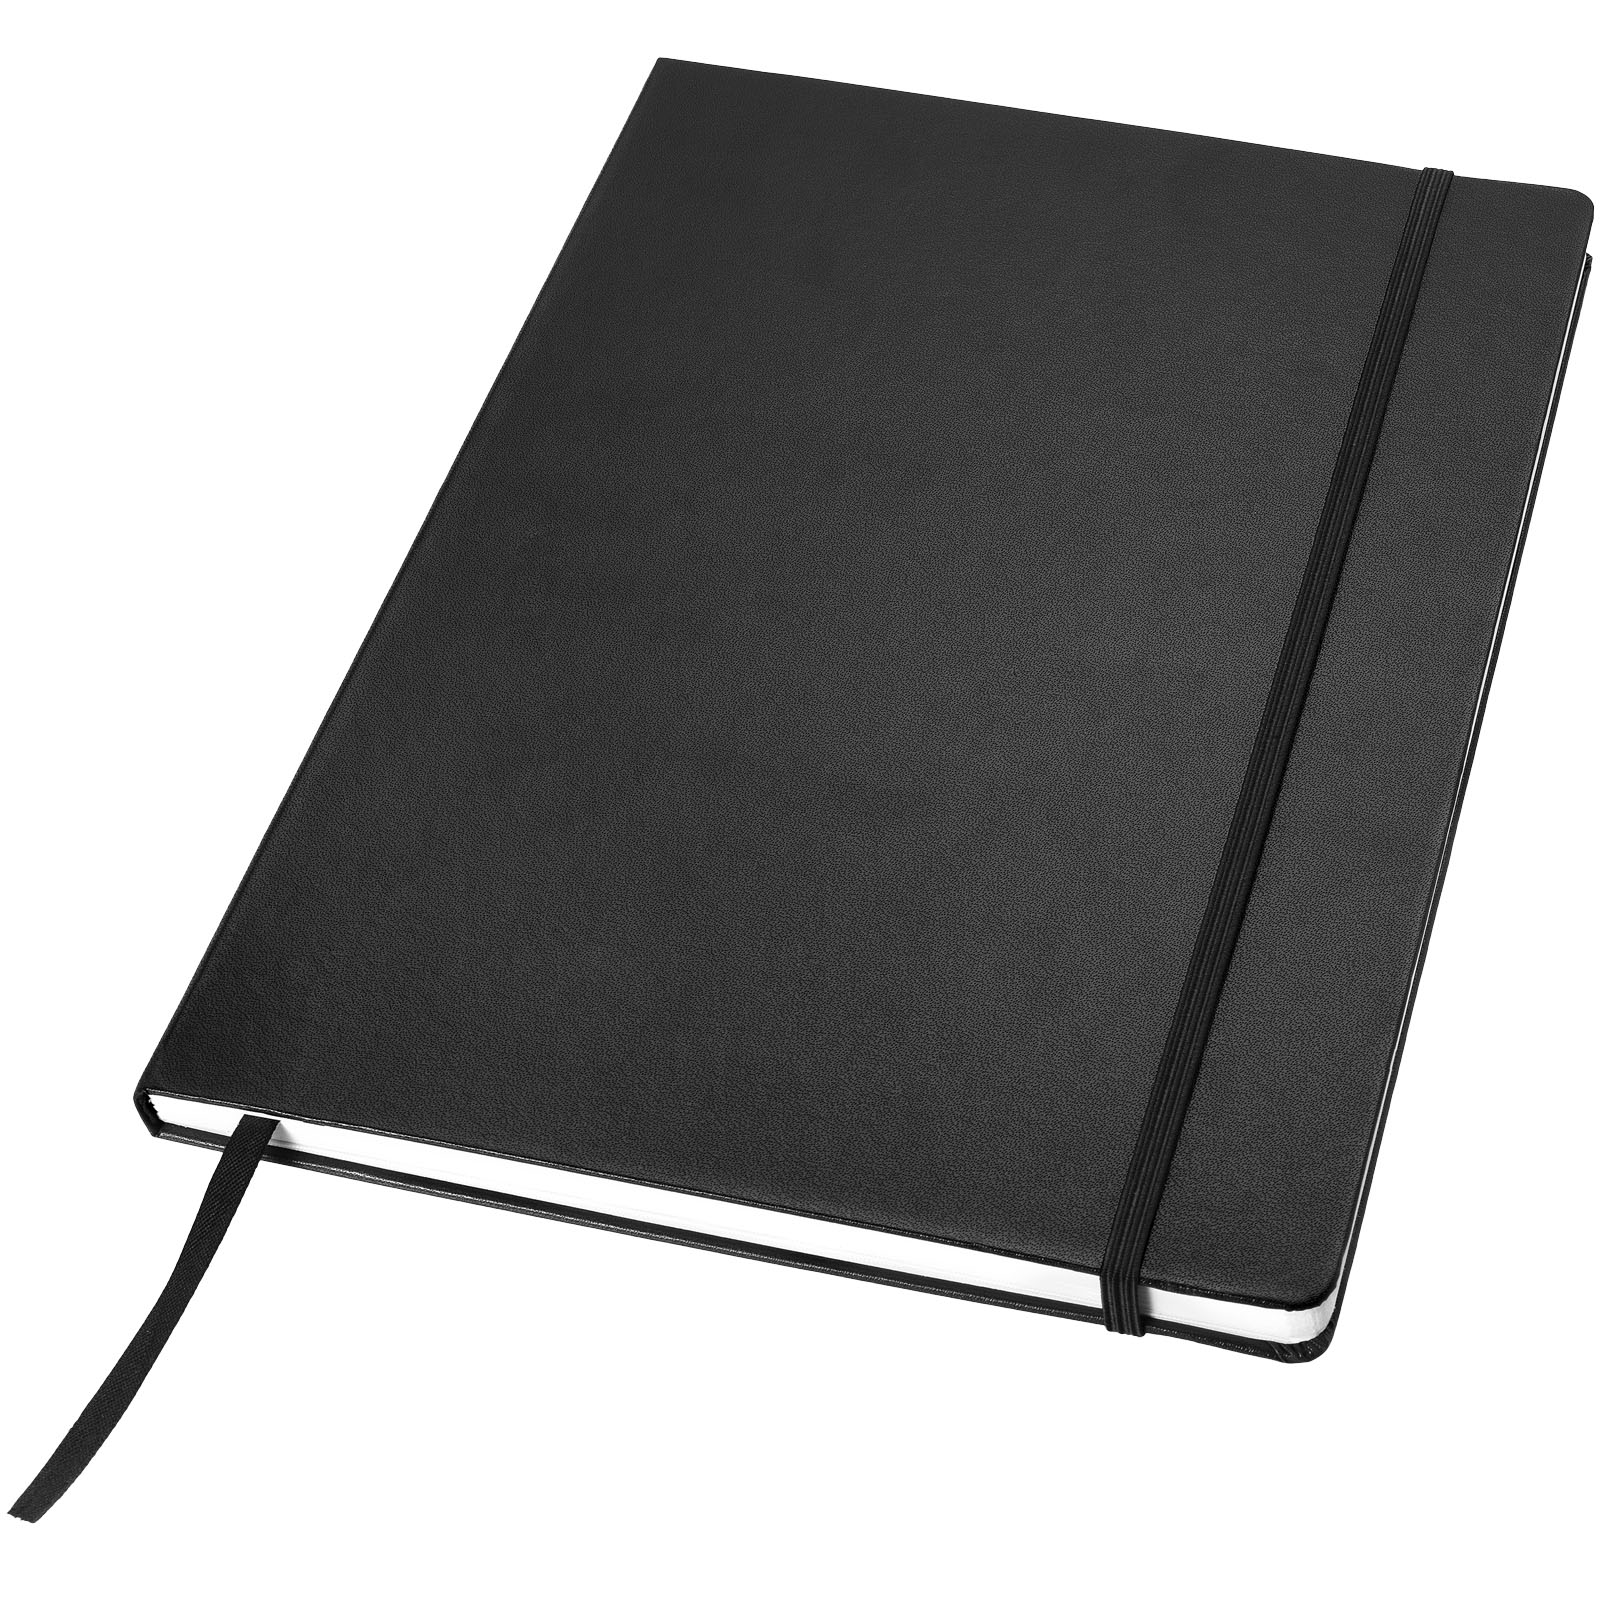 Advertising Hard cover notebooks - Executive A4 hard cover notebook